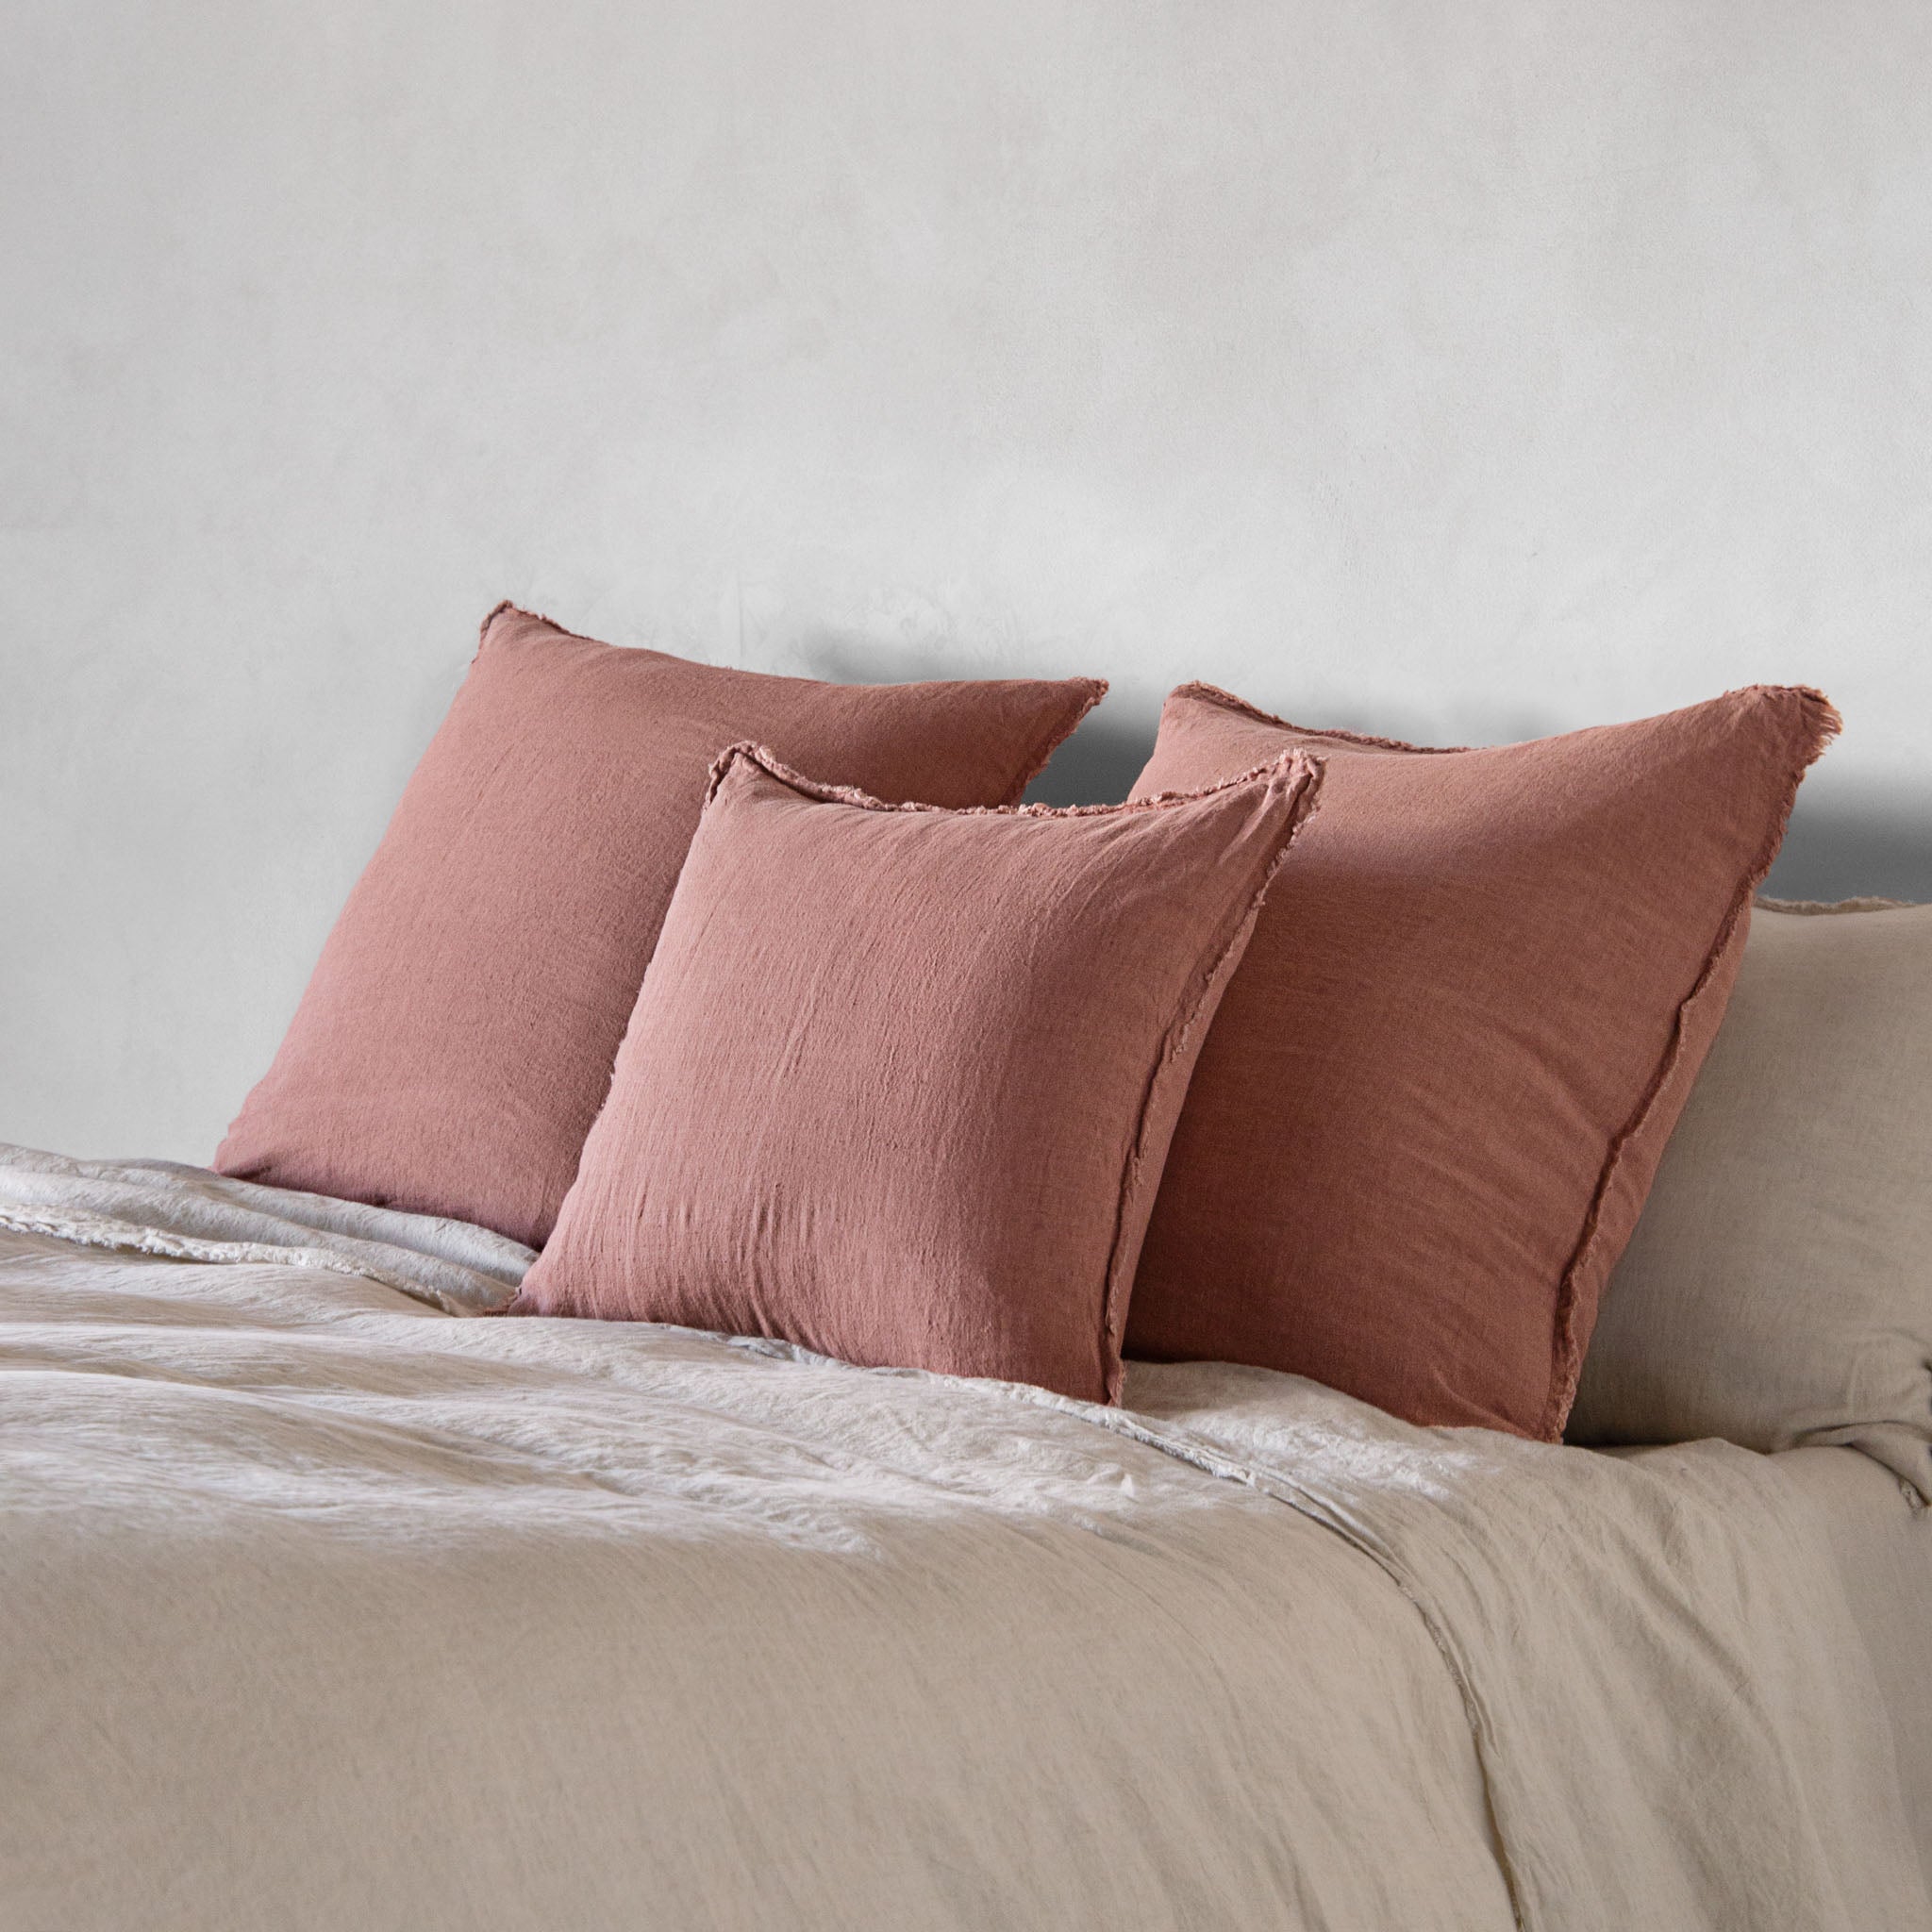 Linen Cushion & Cover | Clay Pink | Hale Mercantile Co.